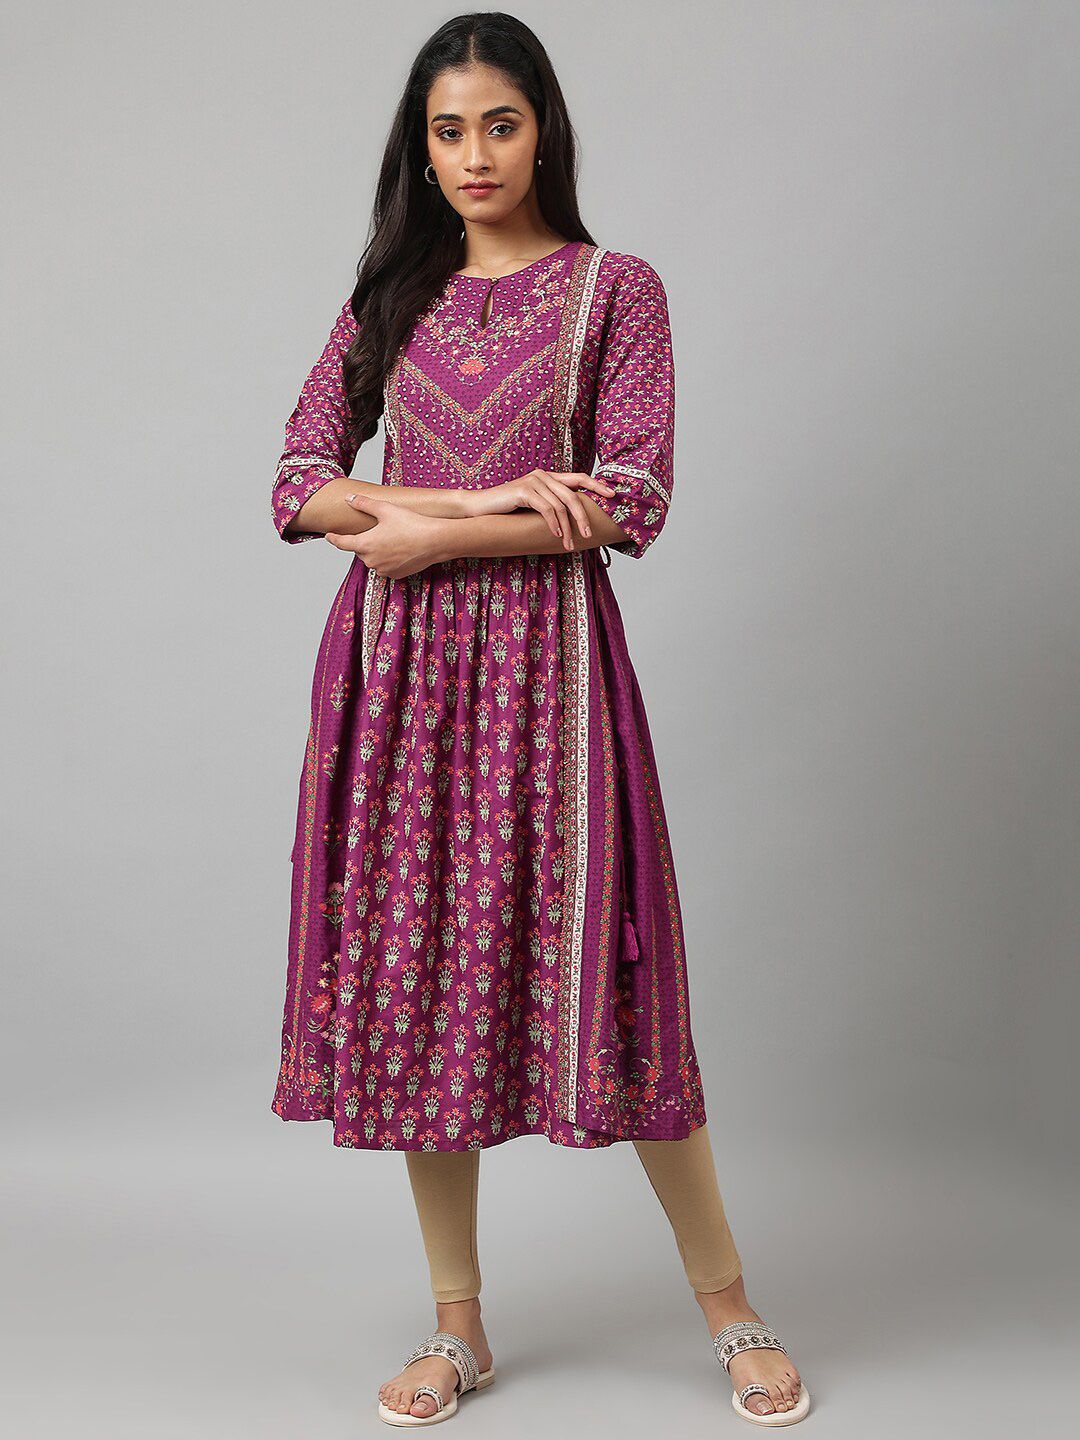 W Purple & Pink Floral Keyhole Neck Chiffon Ethnic A-Line Midi Dress Price in India